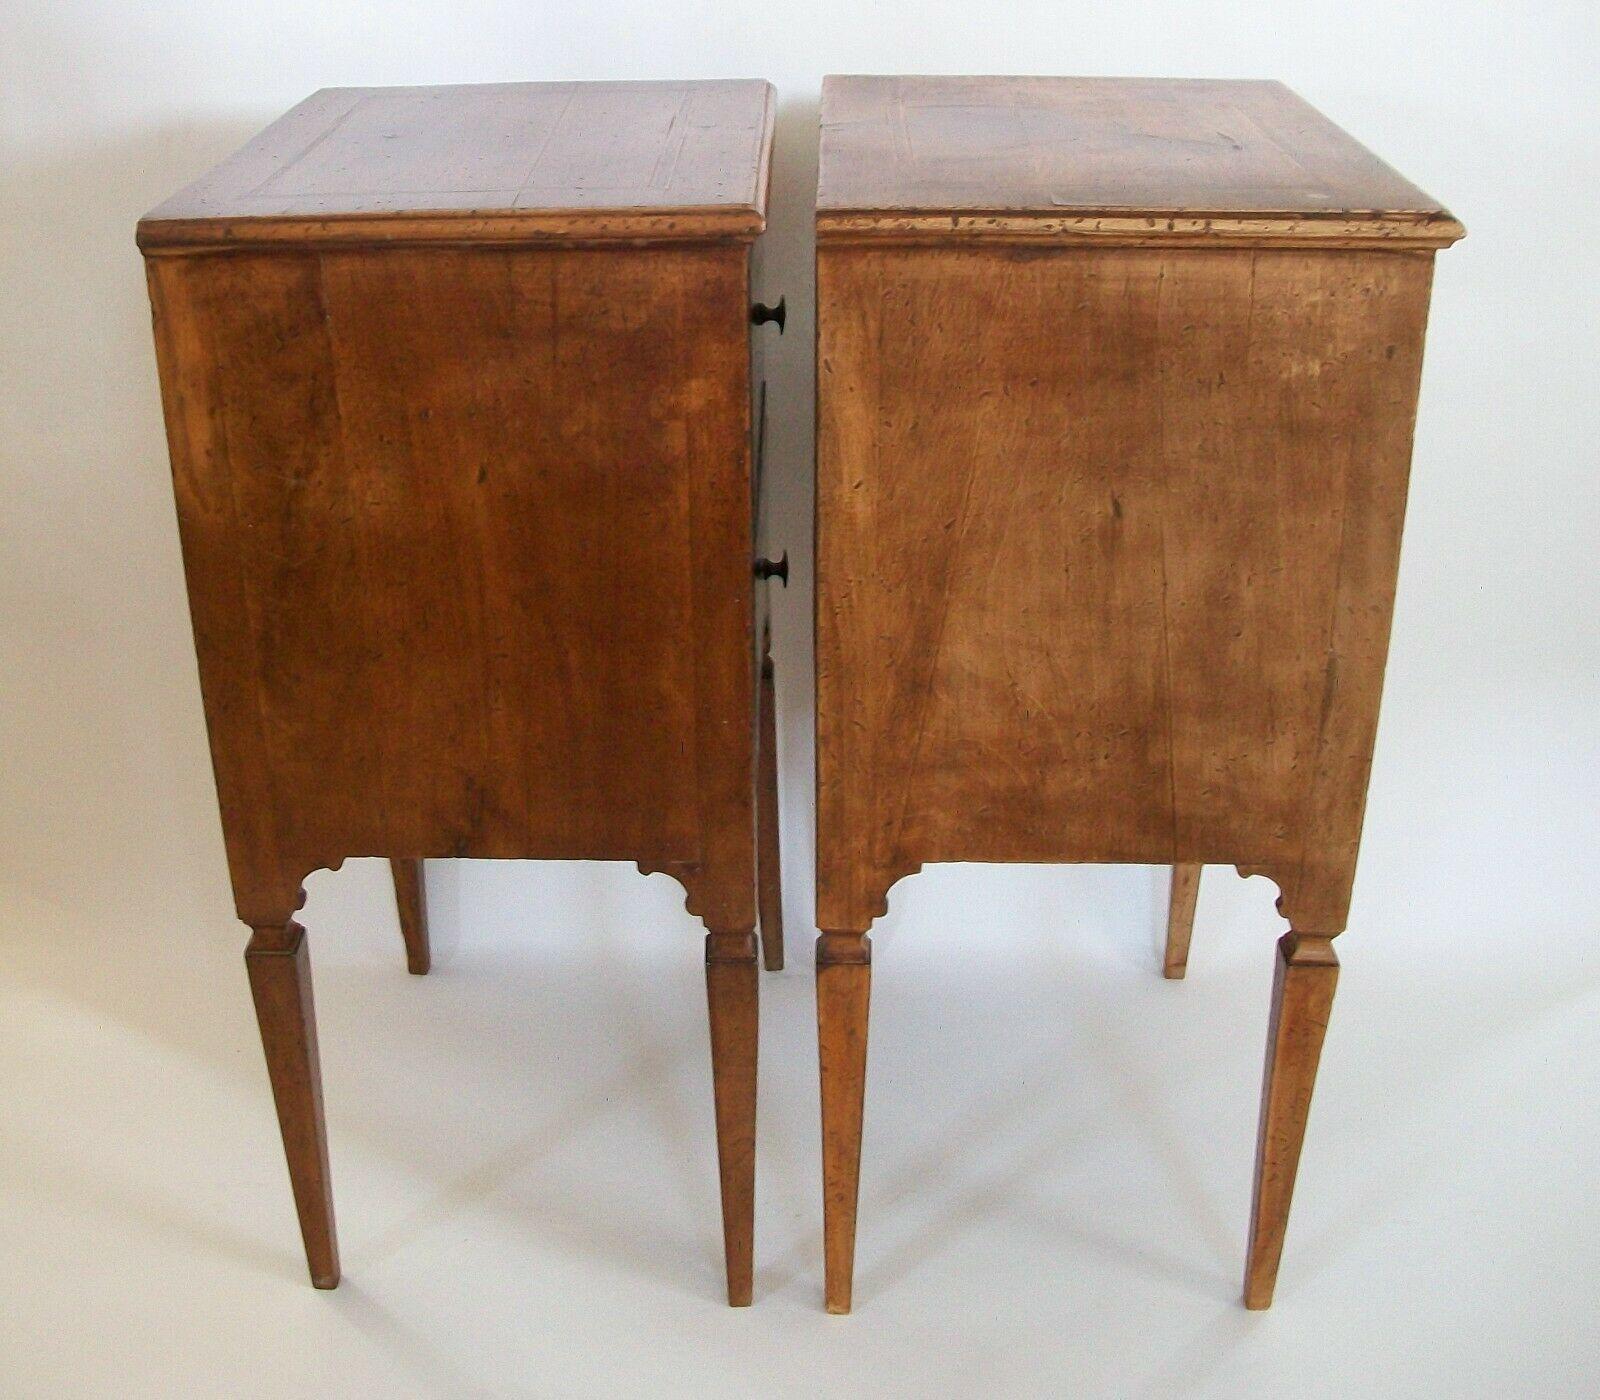 North Italian Antique Pair of Walnut Neoclassical Bedside Tables, Circa 1820 For Sale 1